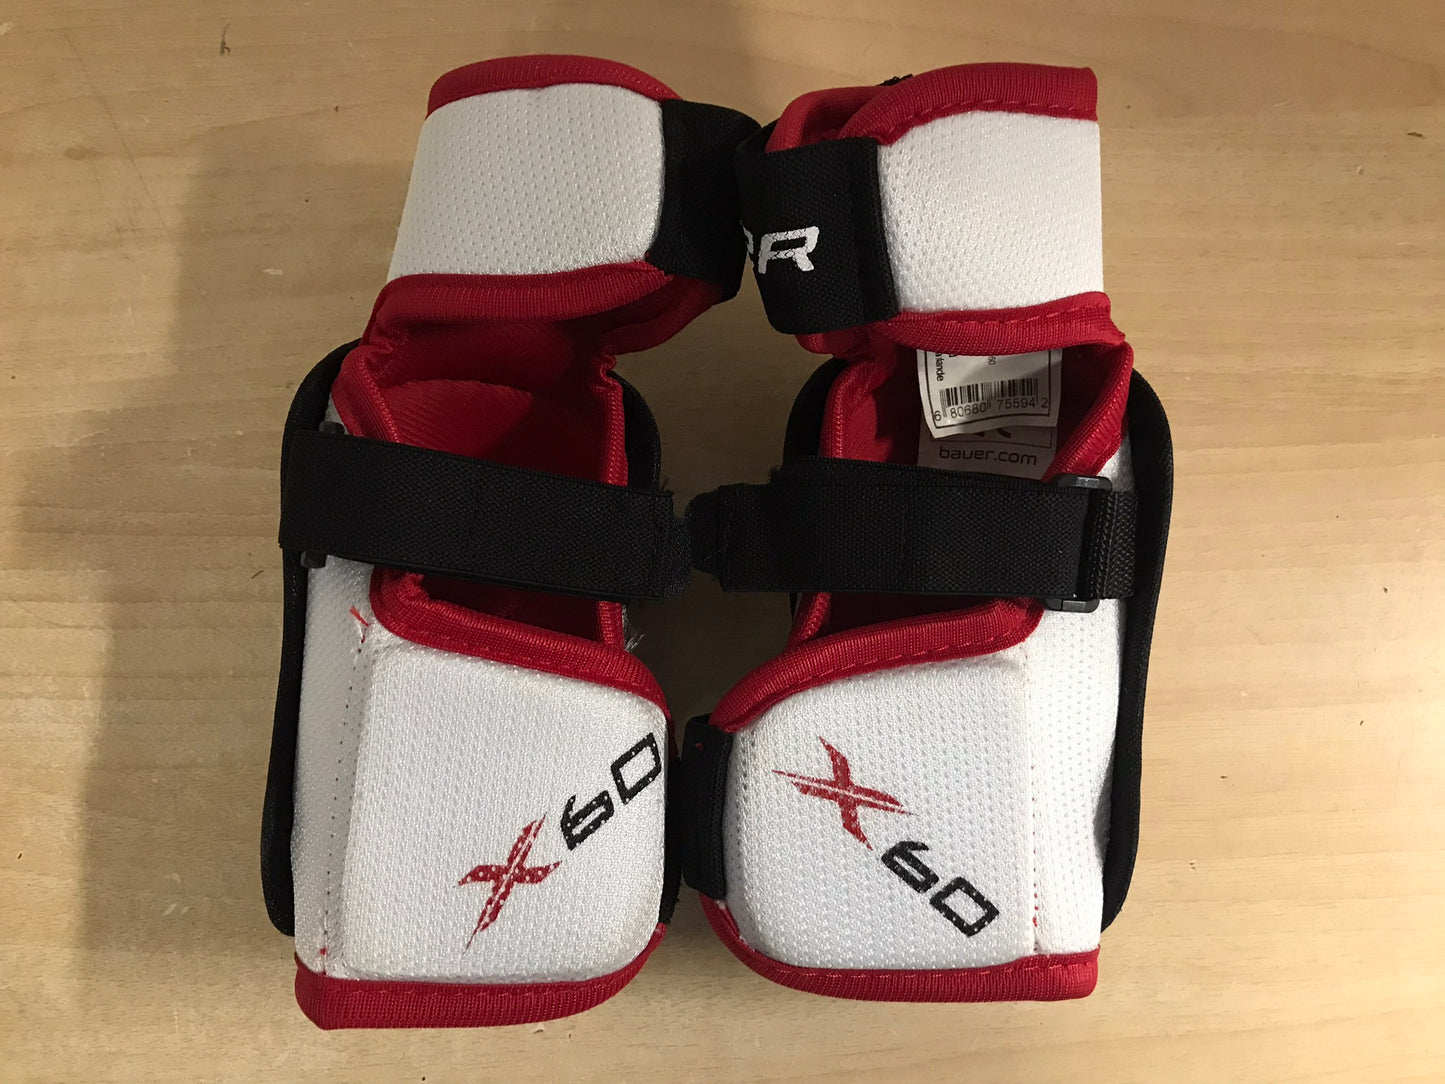 Hockey Elbow Pads Child Size Junior Small  Bauer Vapor x 60 Black  White Red New Demo Model